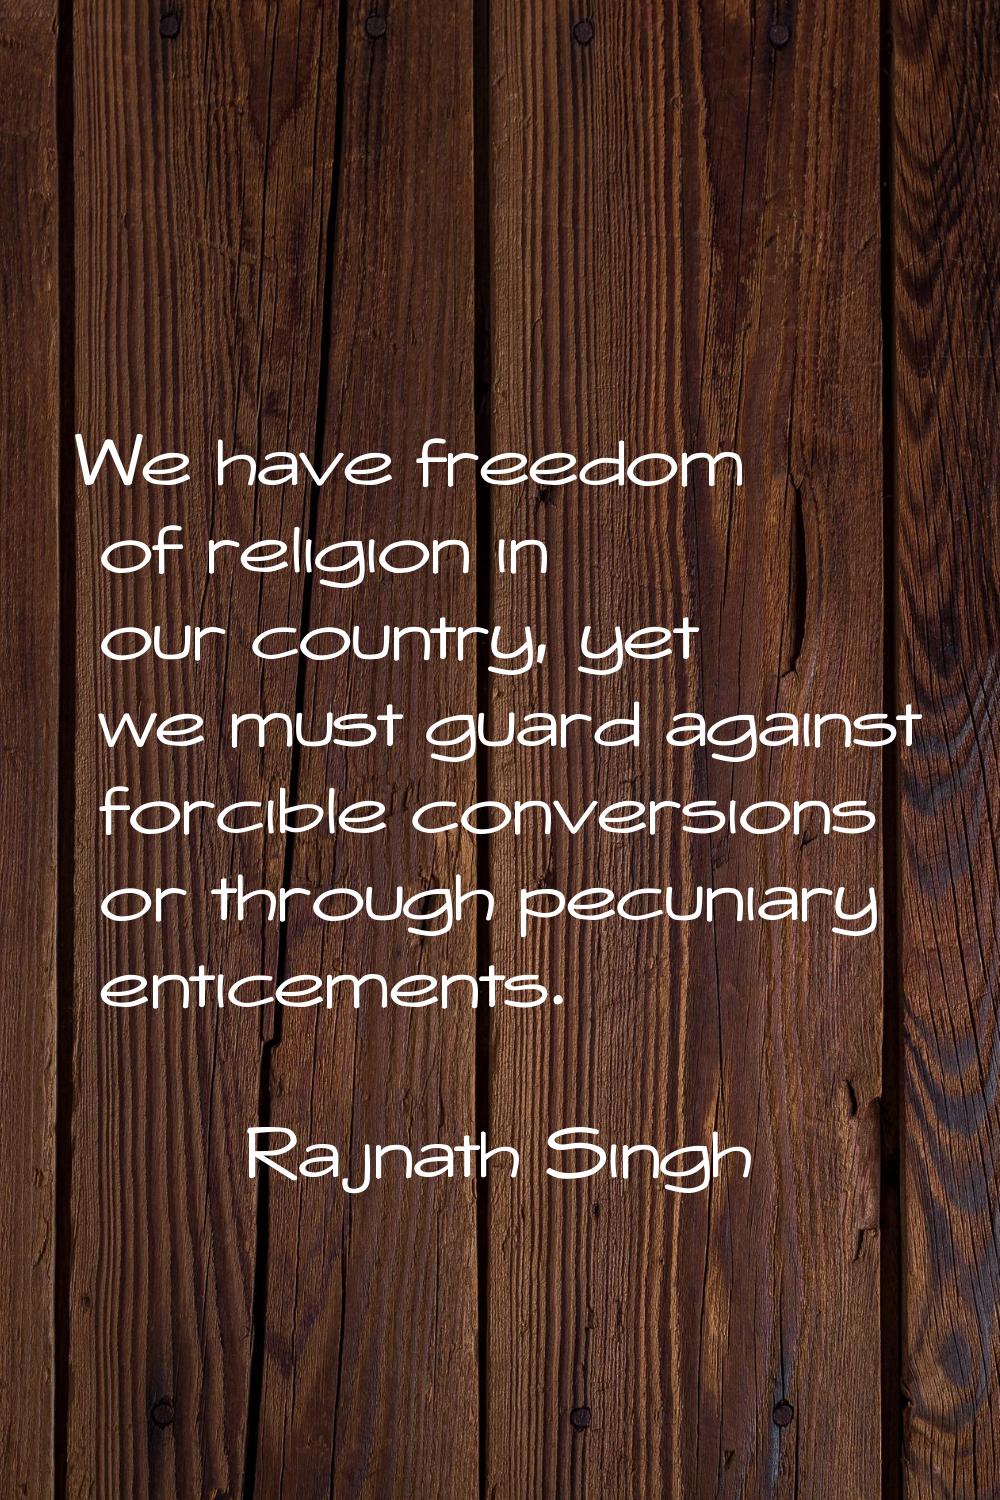 We have freedom of religion in our country, yet we must guard against forcible conversions or throu